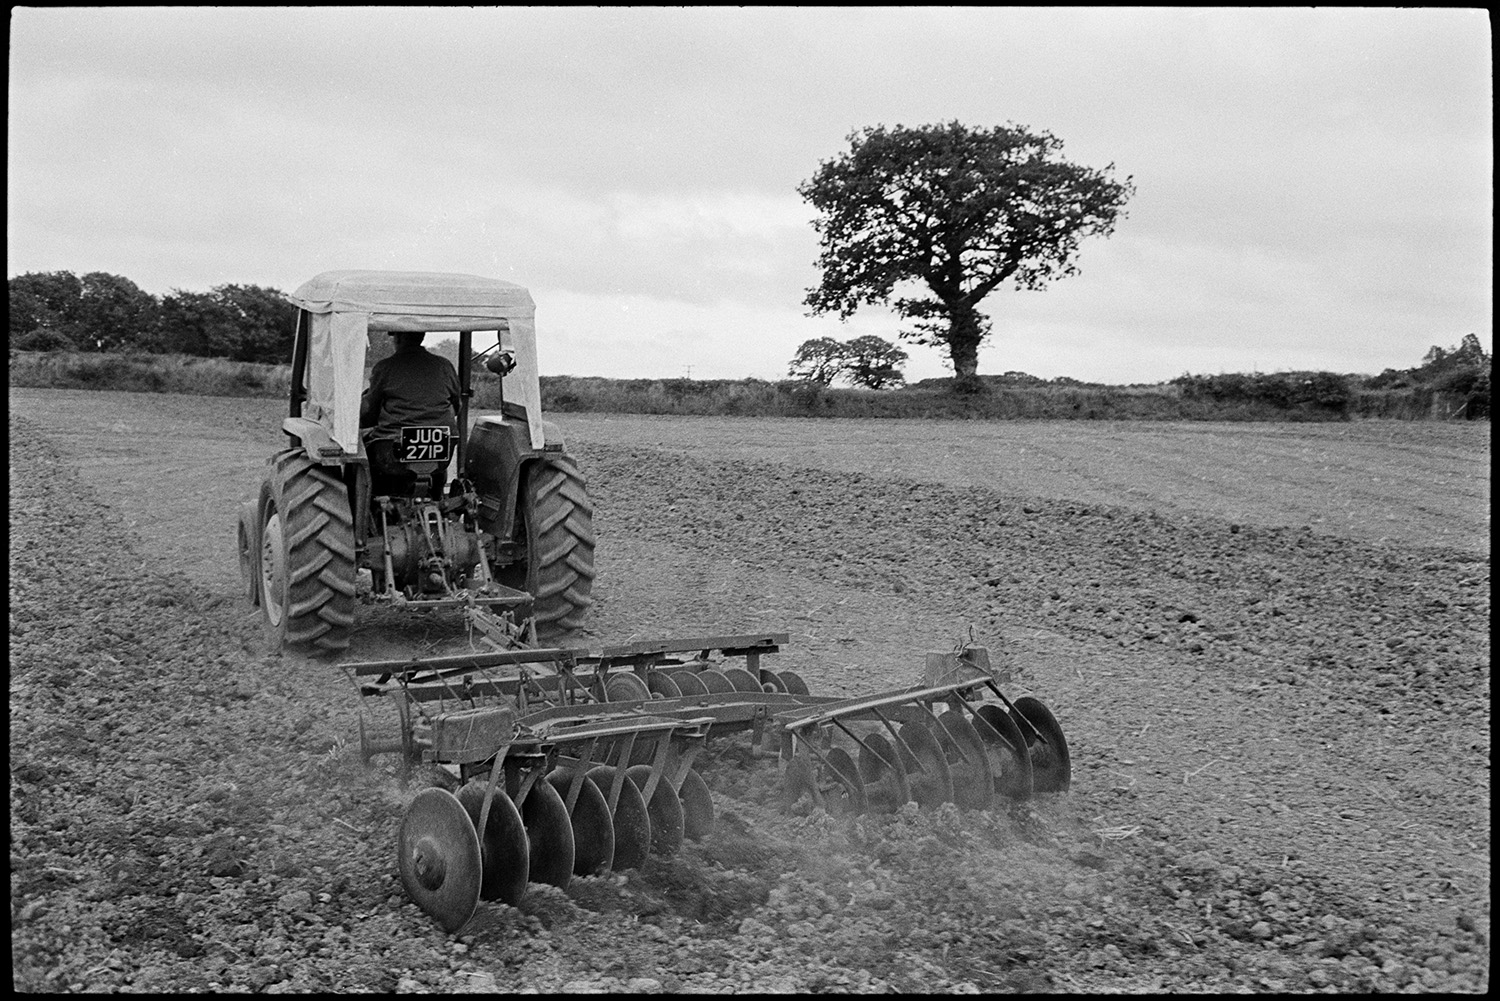 Harrowing field. 
[John Ward driving a tractor pulling a harrow over a field at Parsonage, Iddesleigh. A tree can be seen in a hedge in the background.]